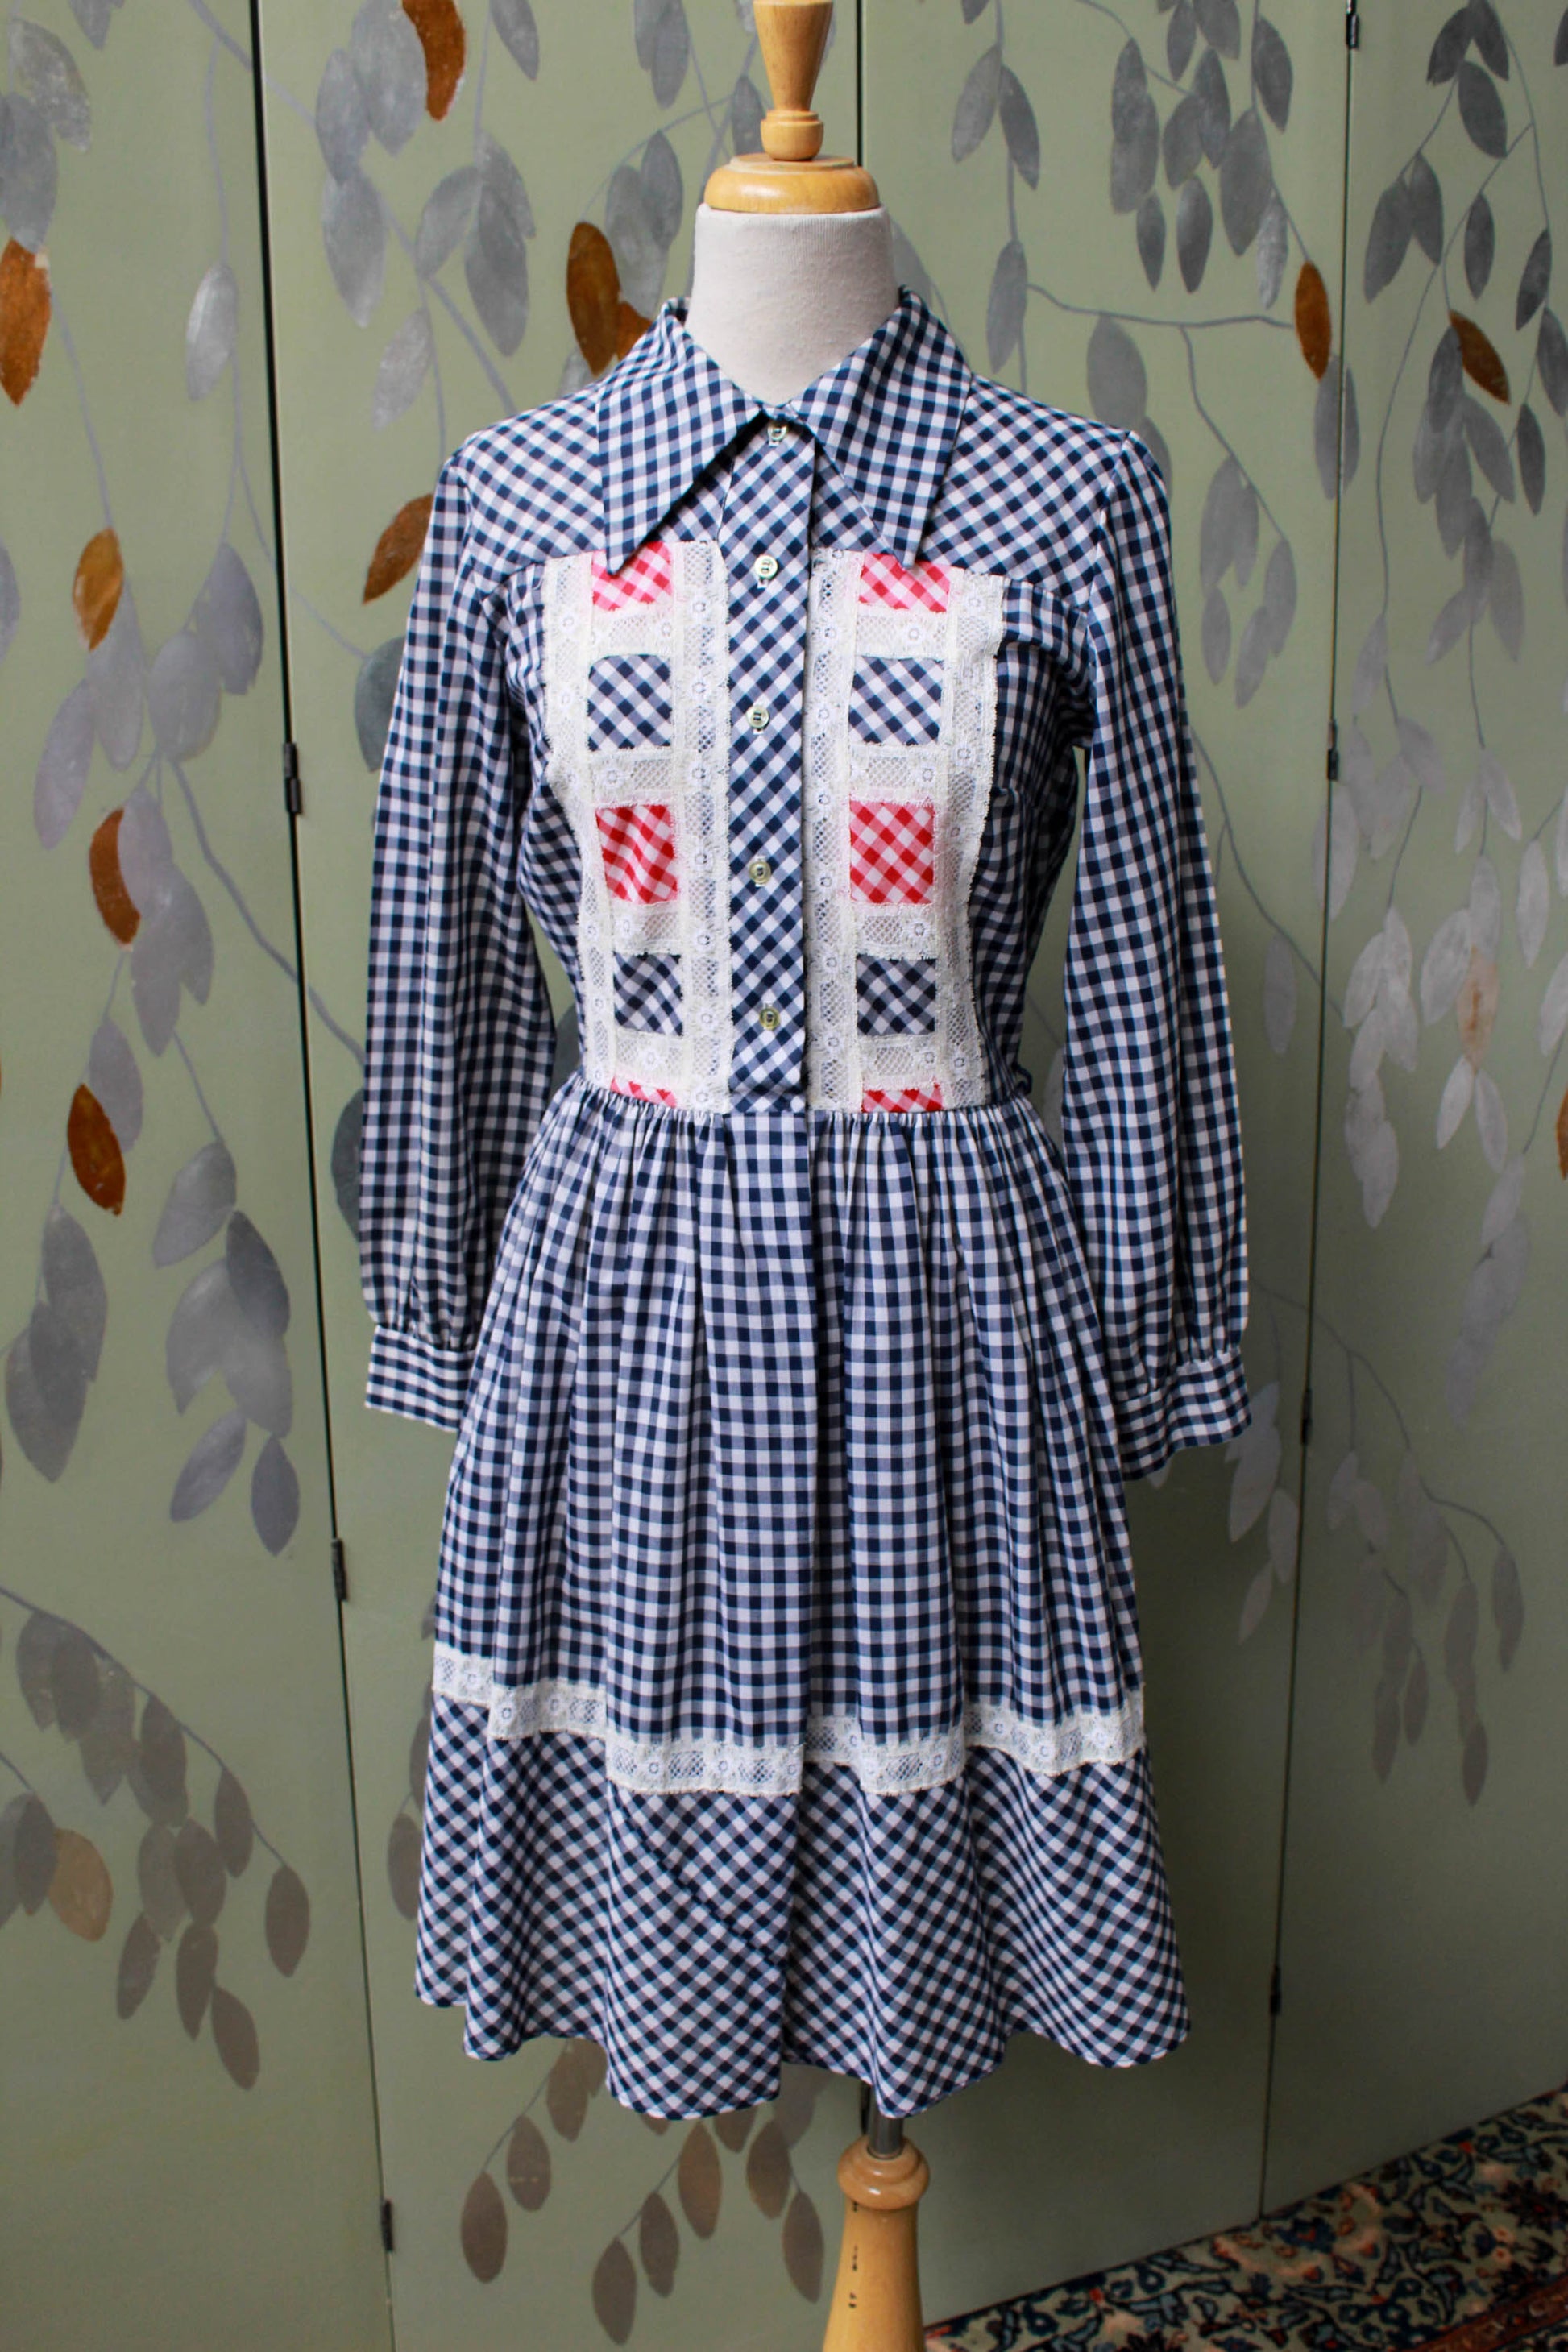 1970s blue white gingham cotton cowgirl dress gathered skirt, button up front with large 70s collar, long sleeve